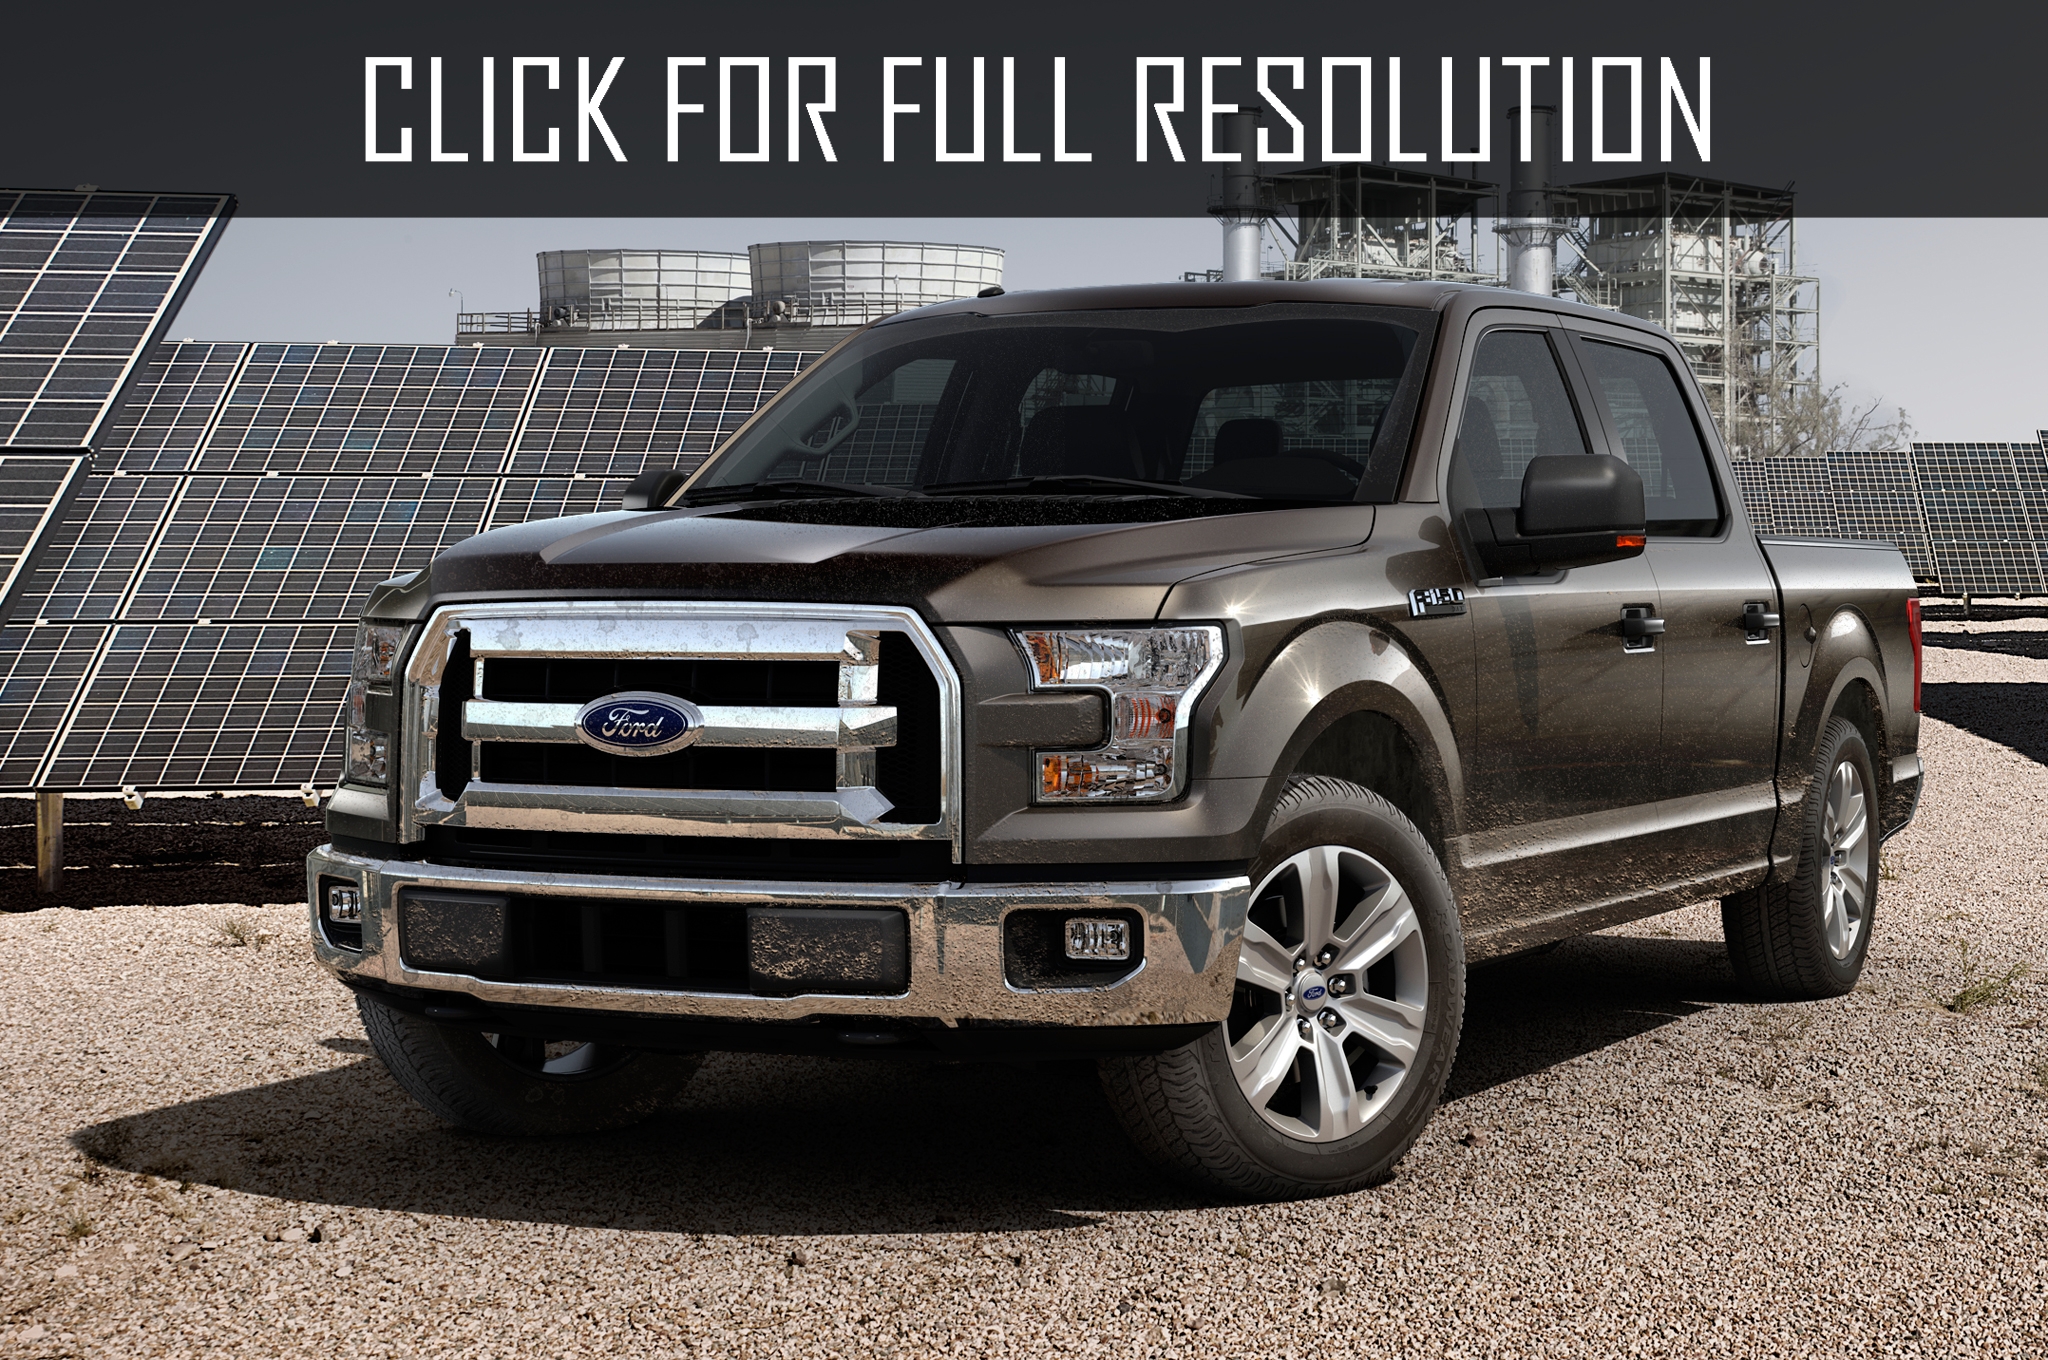 2015 Ford F-150 Ecoboost